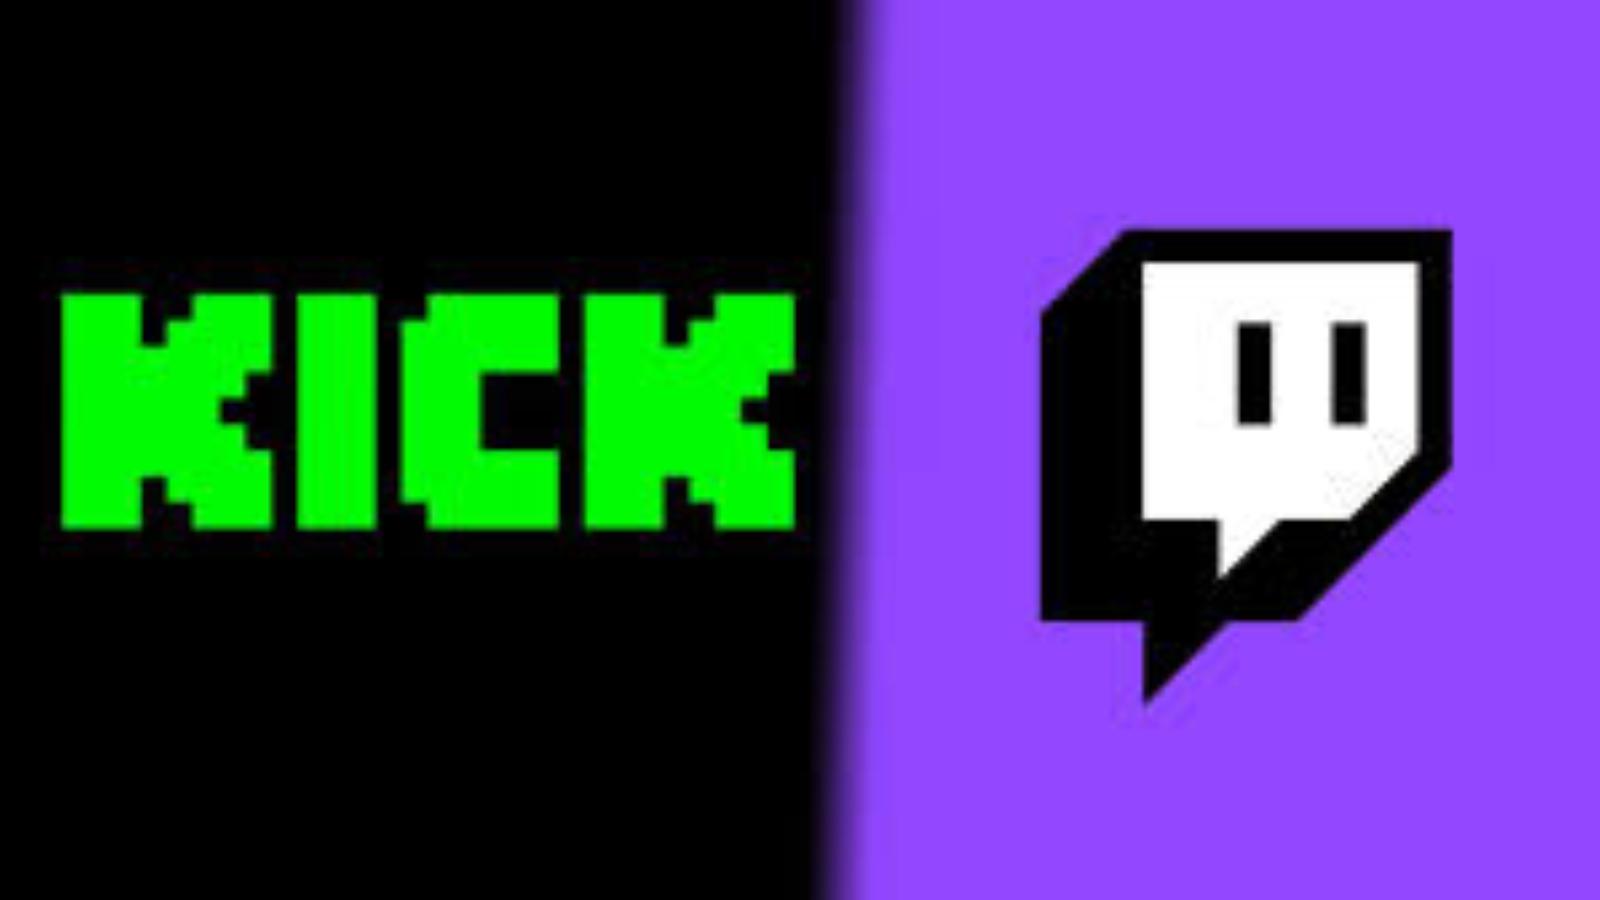 kick and twitch logos side-by-side